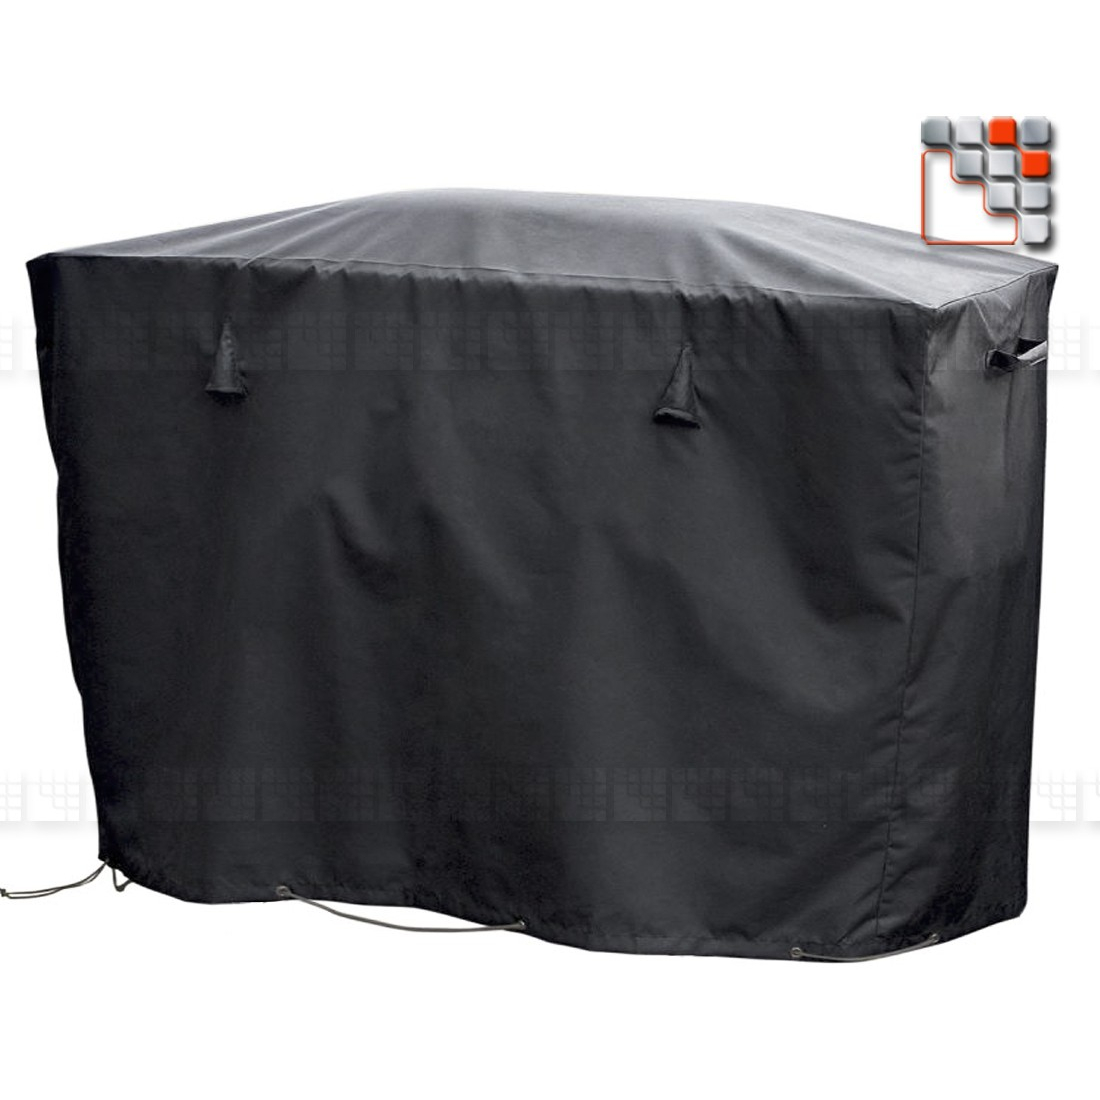 Protective cover 125 x 60 x 100 cm Anti-UV I51-102522 INNOV'AXE Covers & Protections